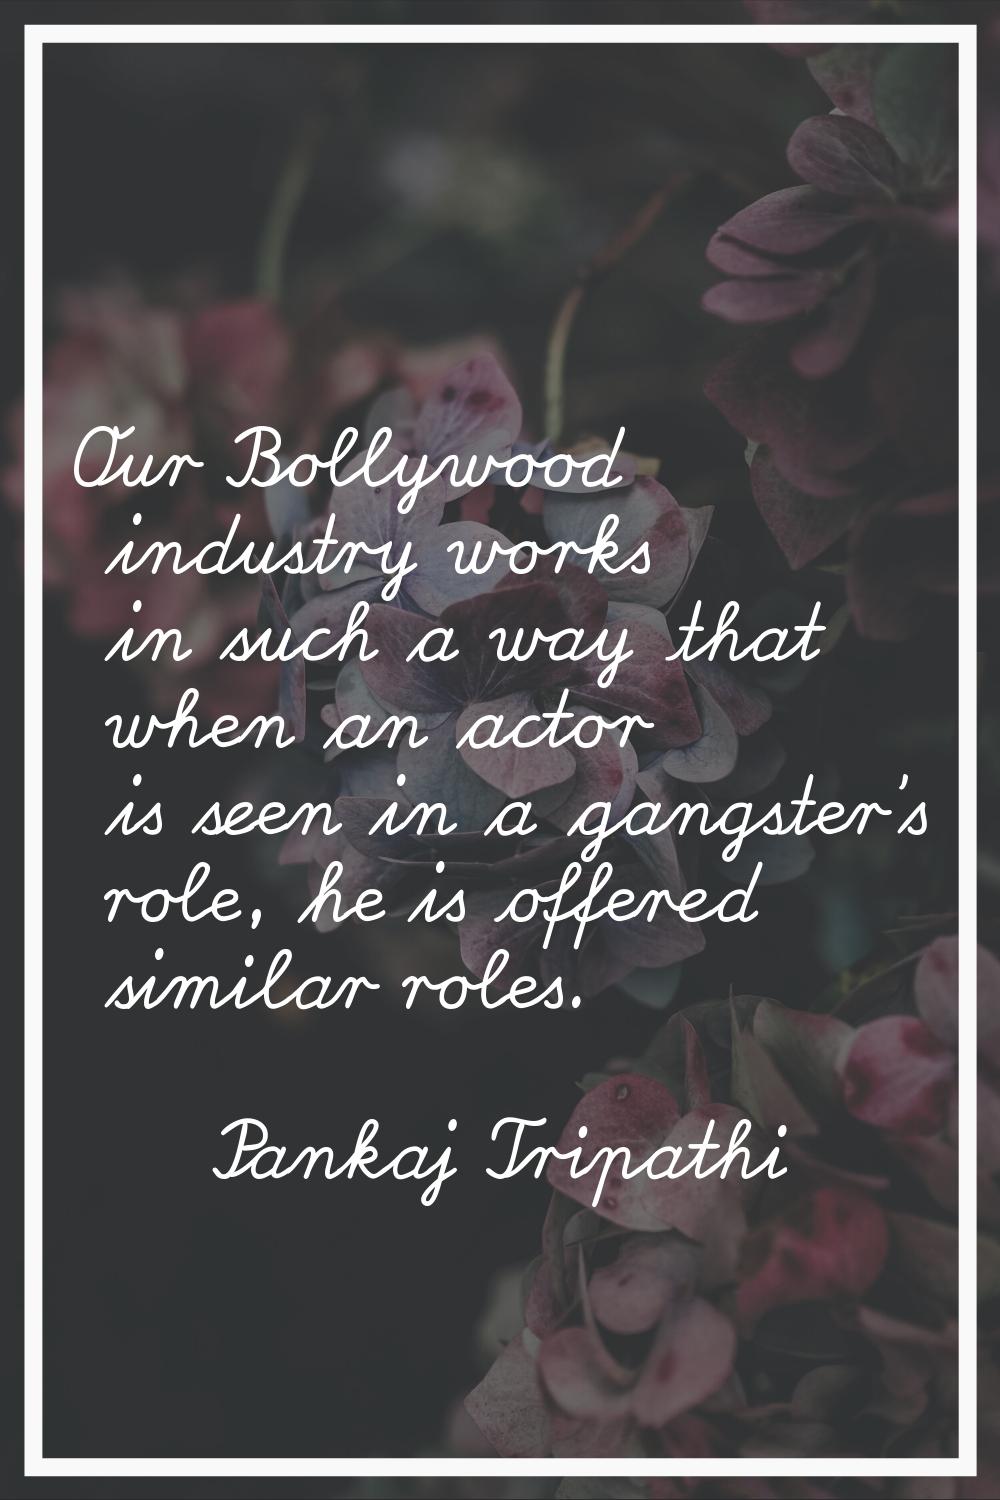 Our Bollywood industry works in such a way that when an actor is seen in a gangster's role, he is o